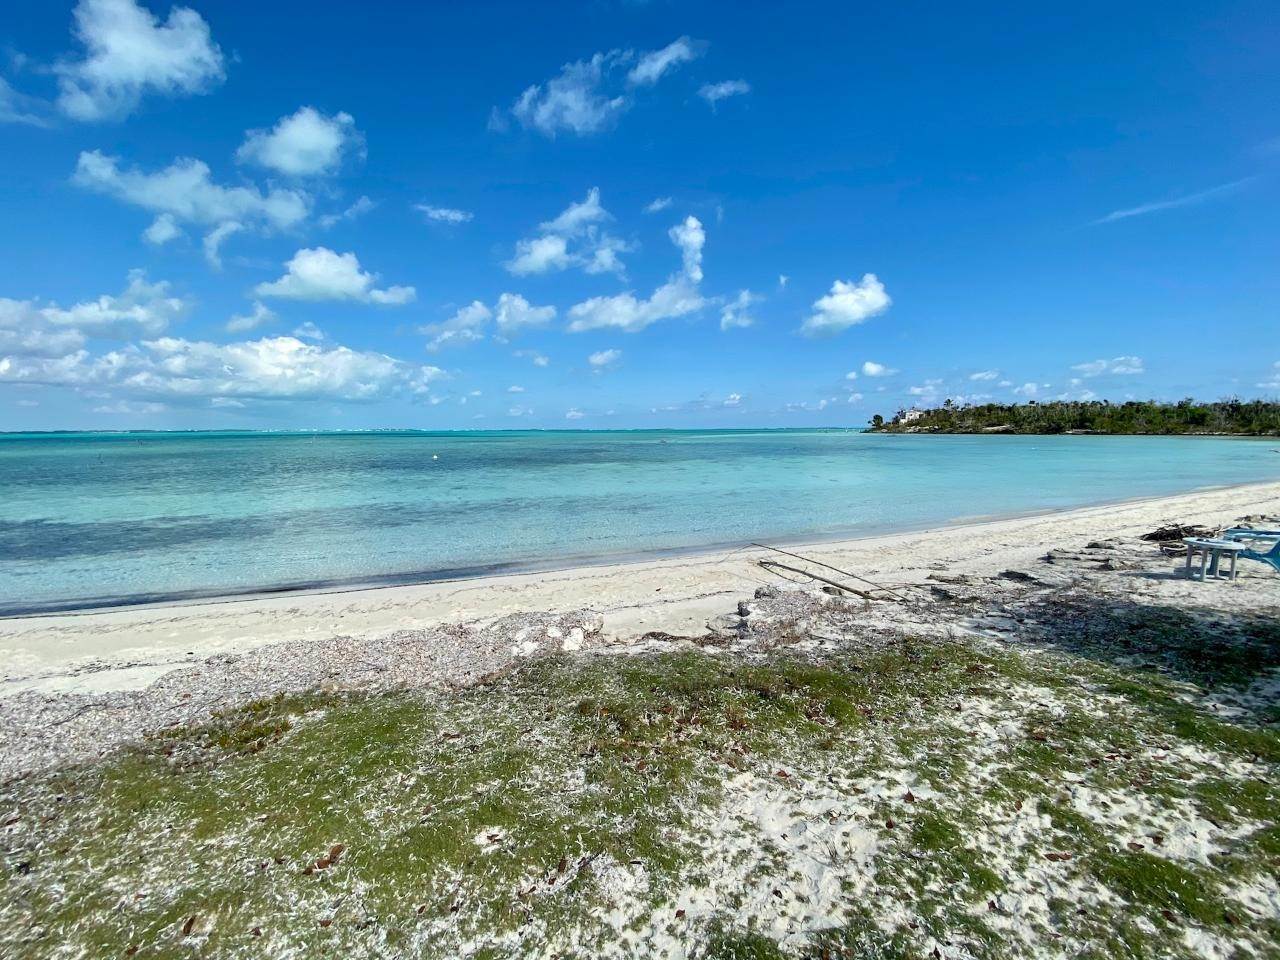 8. Lots / Acreage for Sale at Lubbers Quarters, Abaco, Bahamas